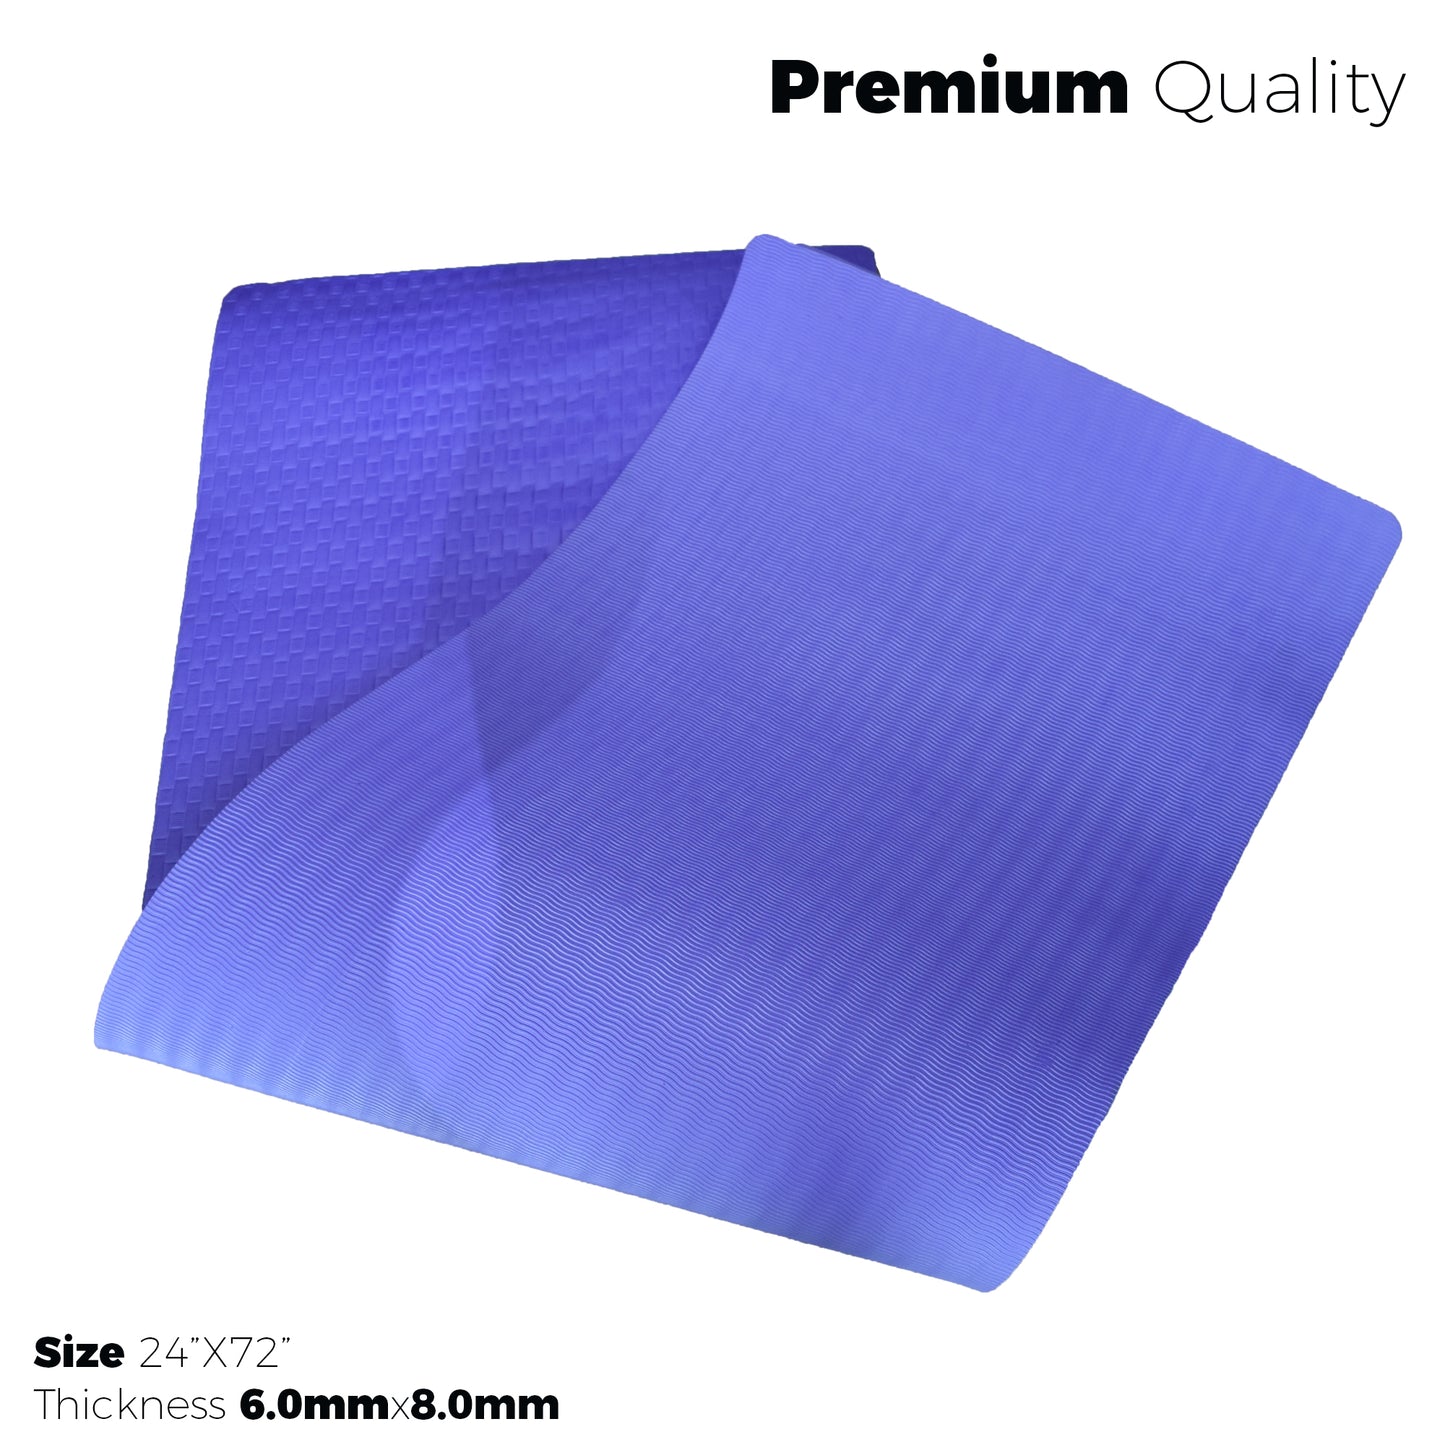 Premium Quality DOUBLE SIDED ECO-FRIENDLY Yoga / Gym Mat Imported from China